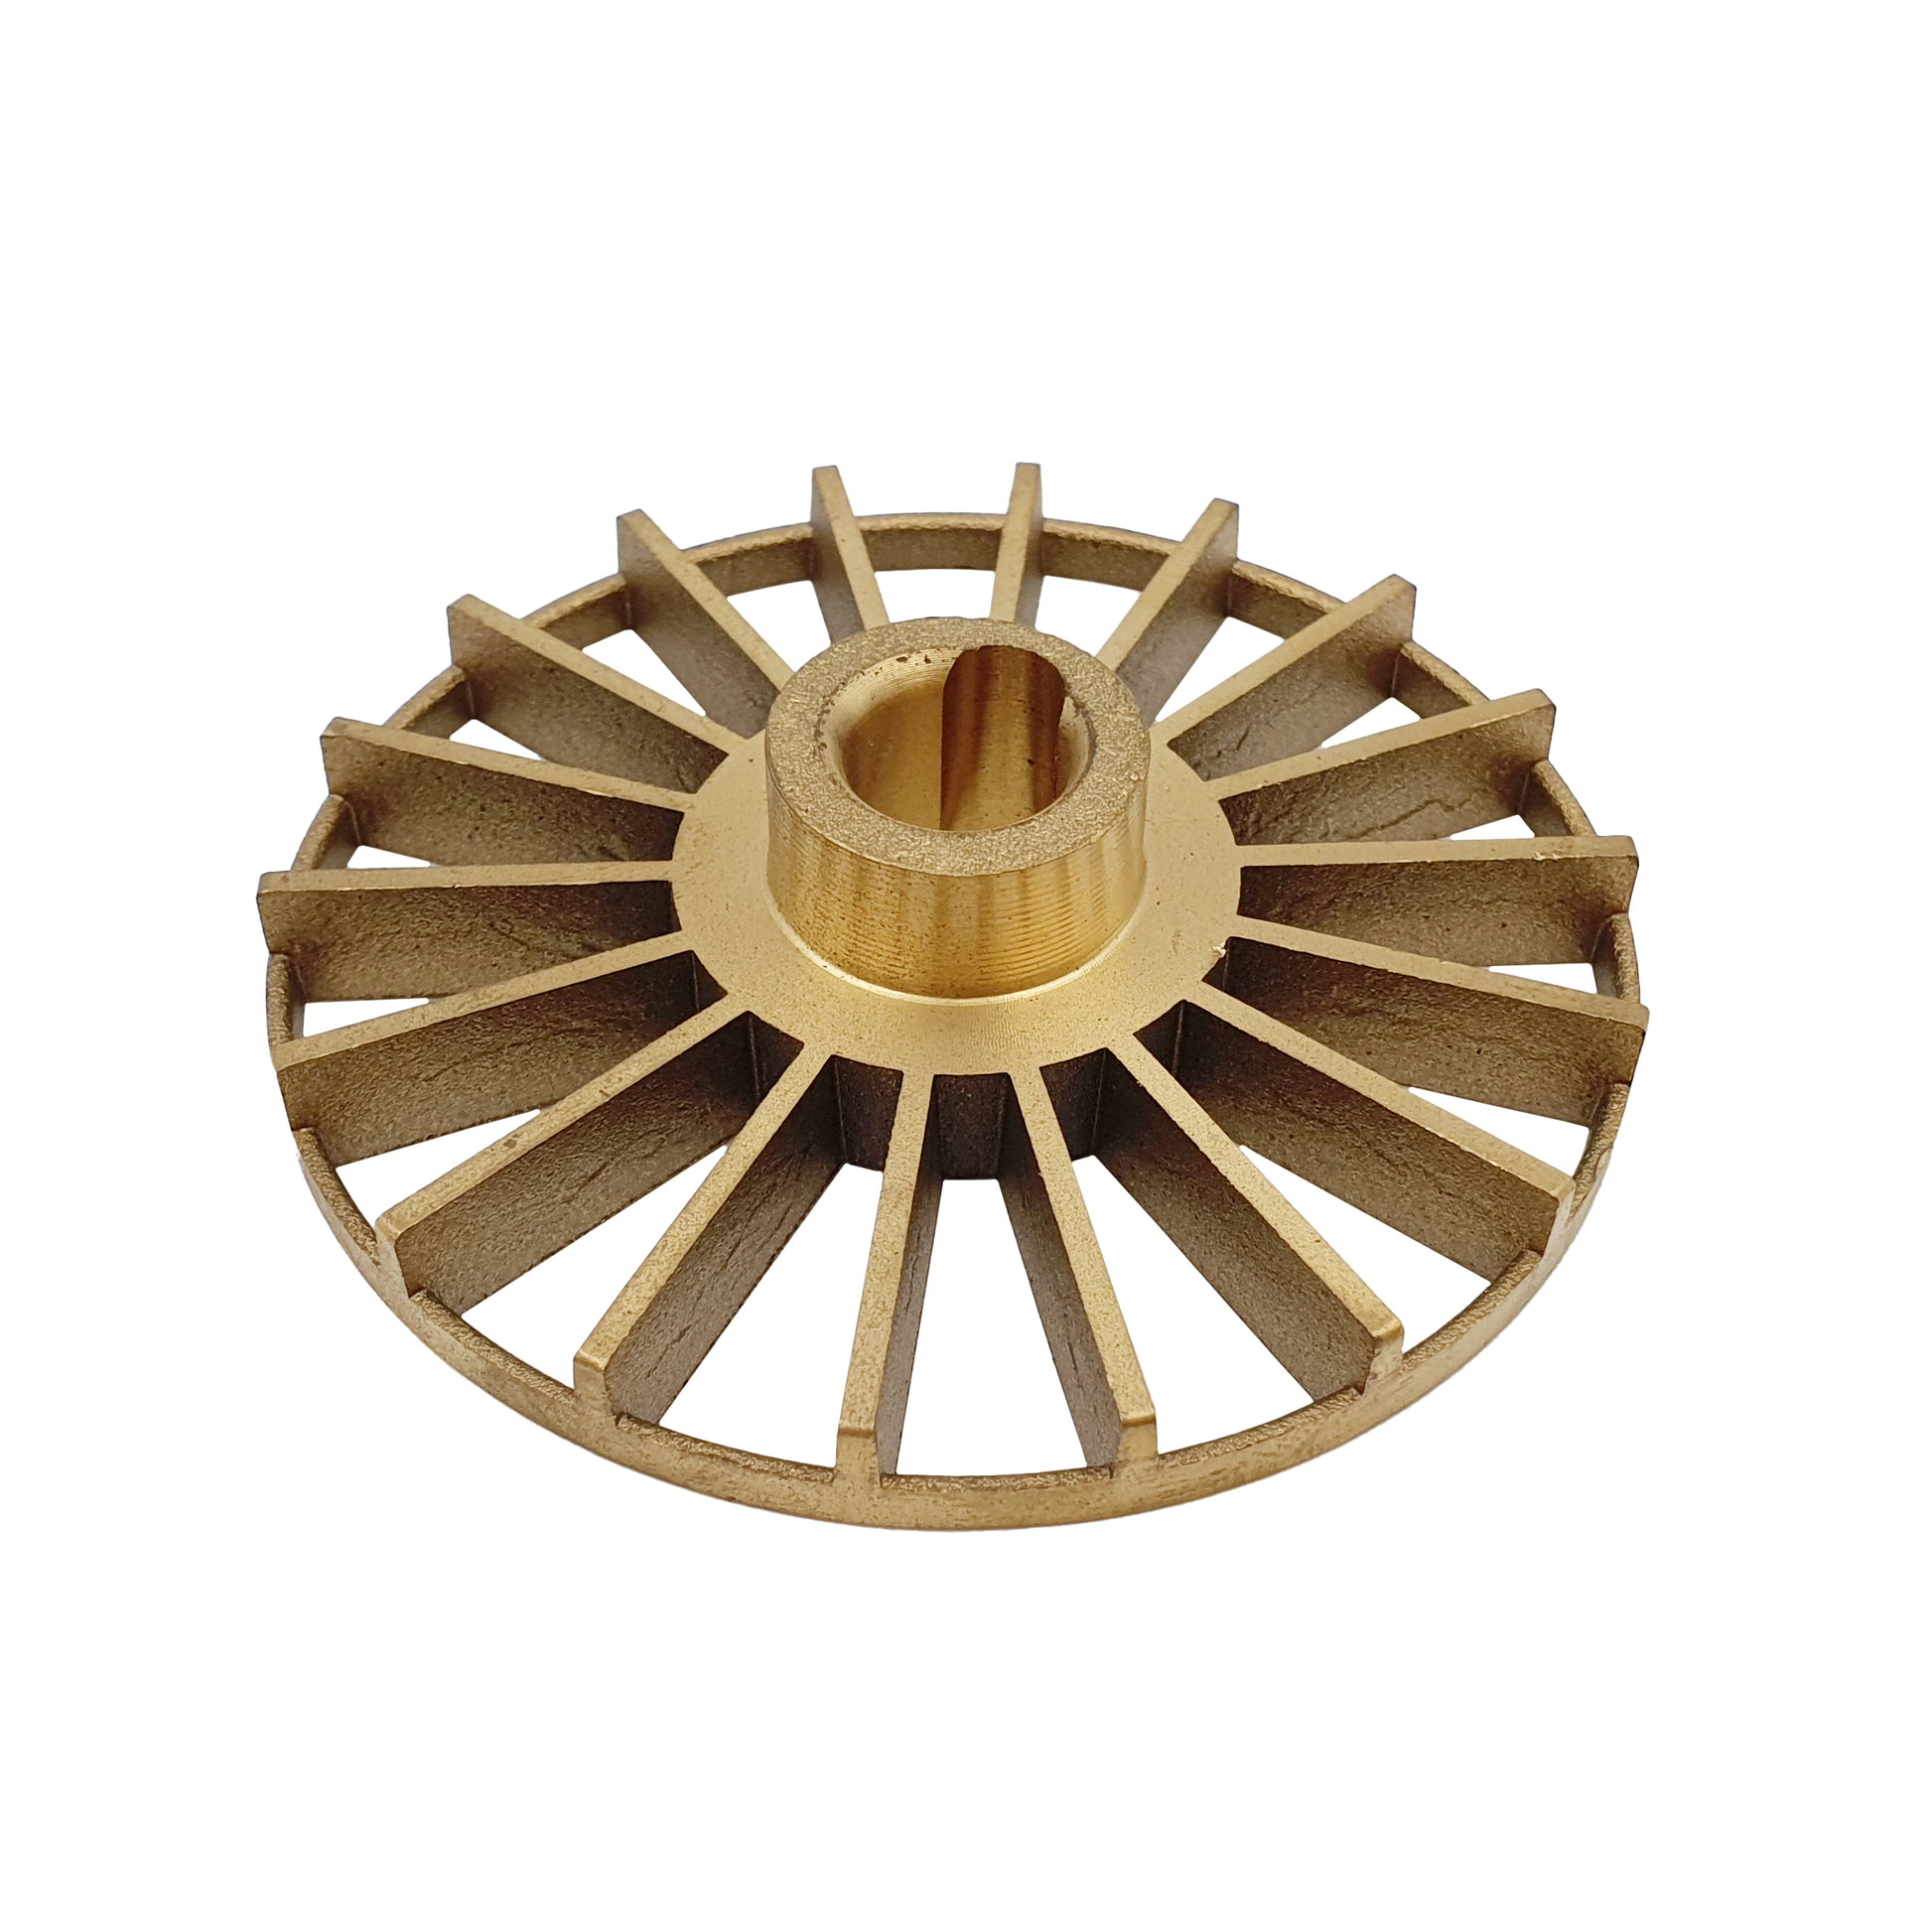 Brass Impeller to suit Rover Pump BE-M 14 and 20